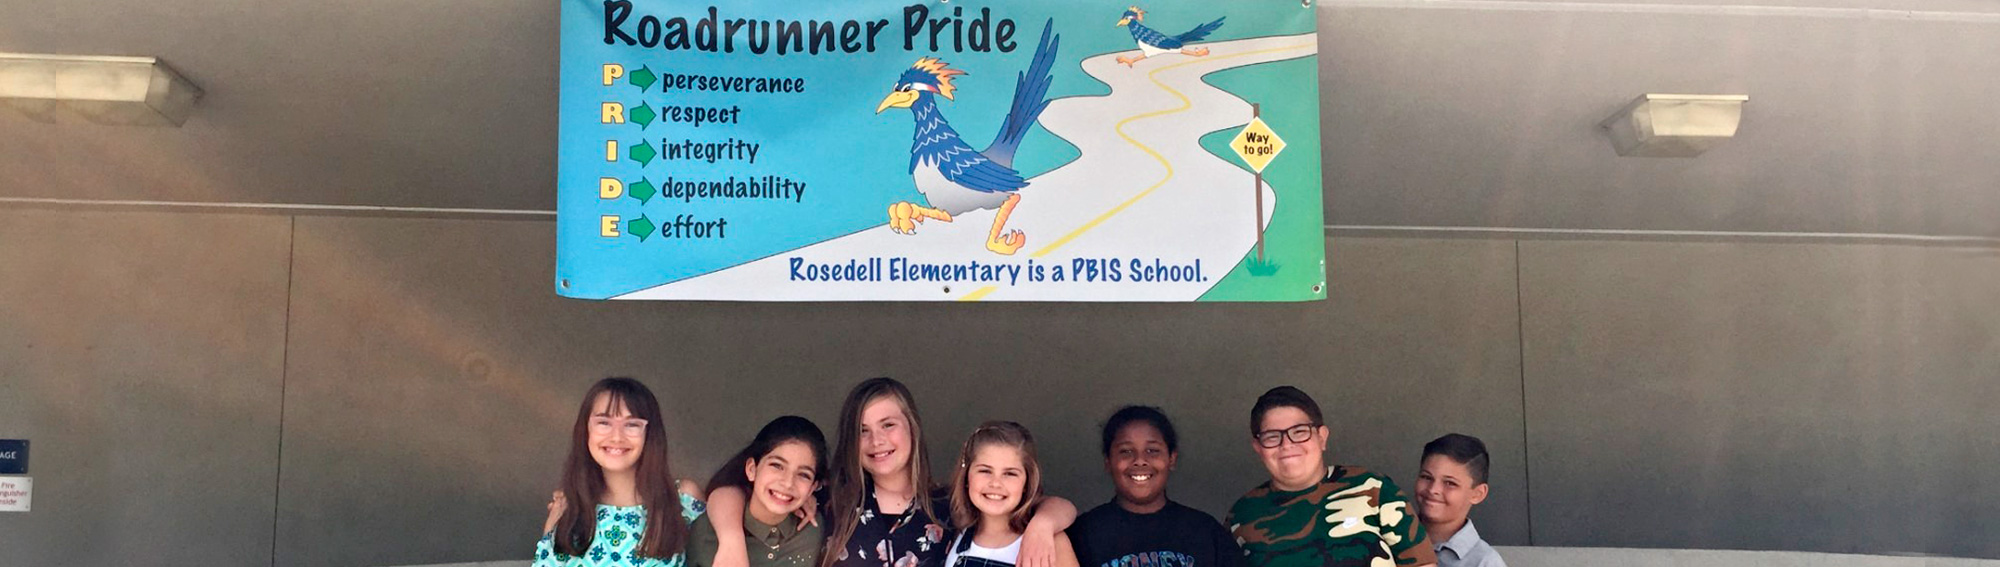 smiling students with a banner that says Roadrunner Pride. Perseverance, Respect, Integrity, Dependability, Effort. Rosedell Elementary is a PBIS School